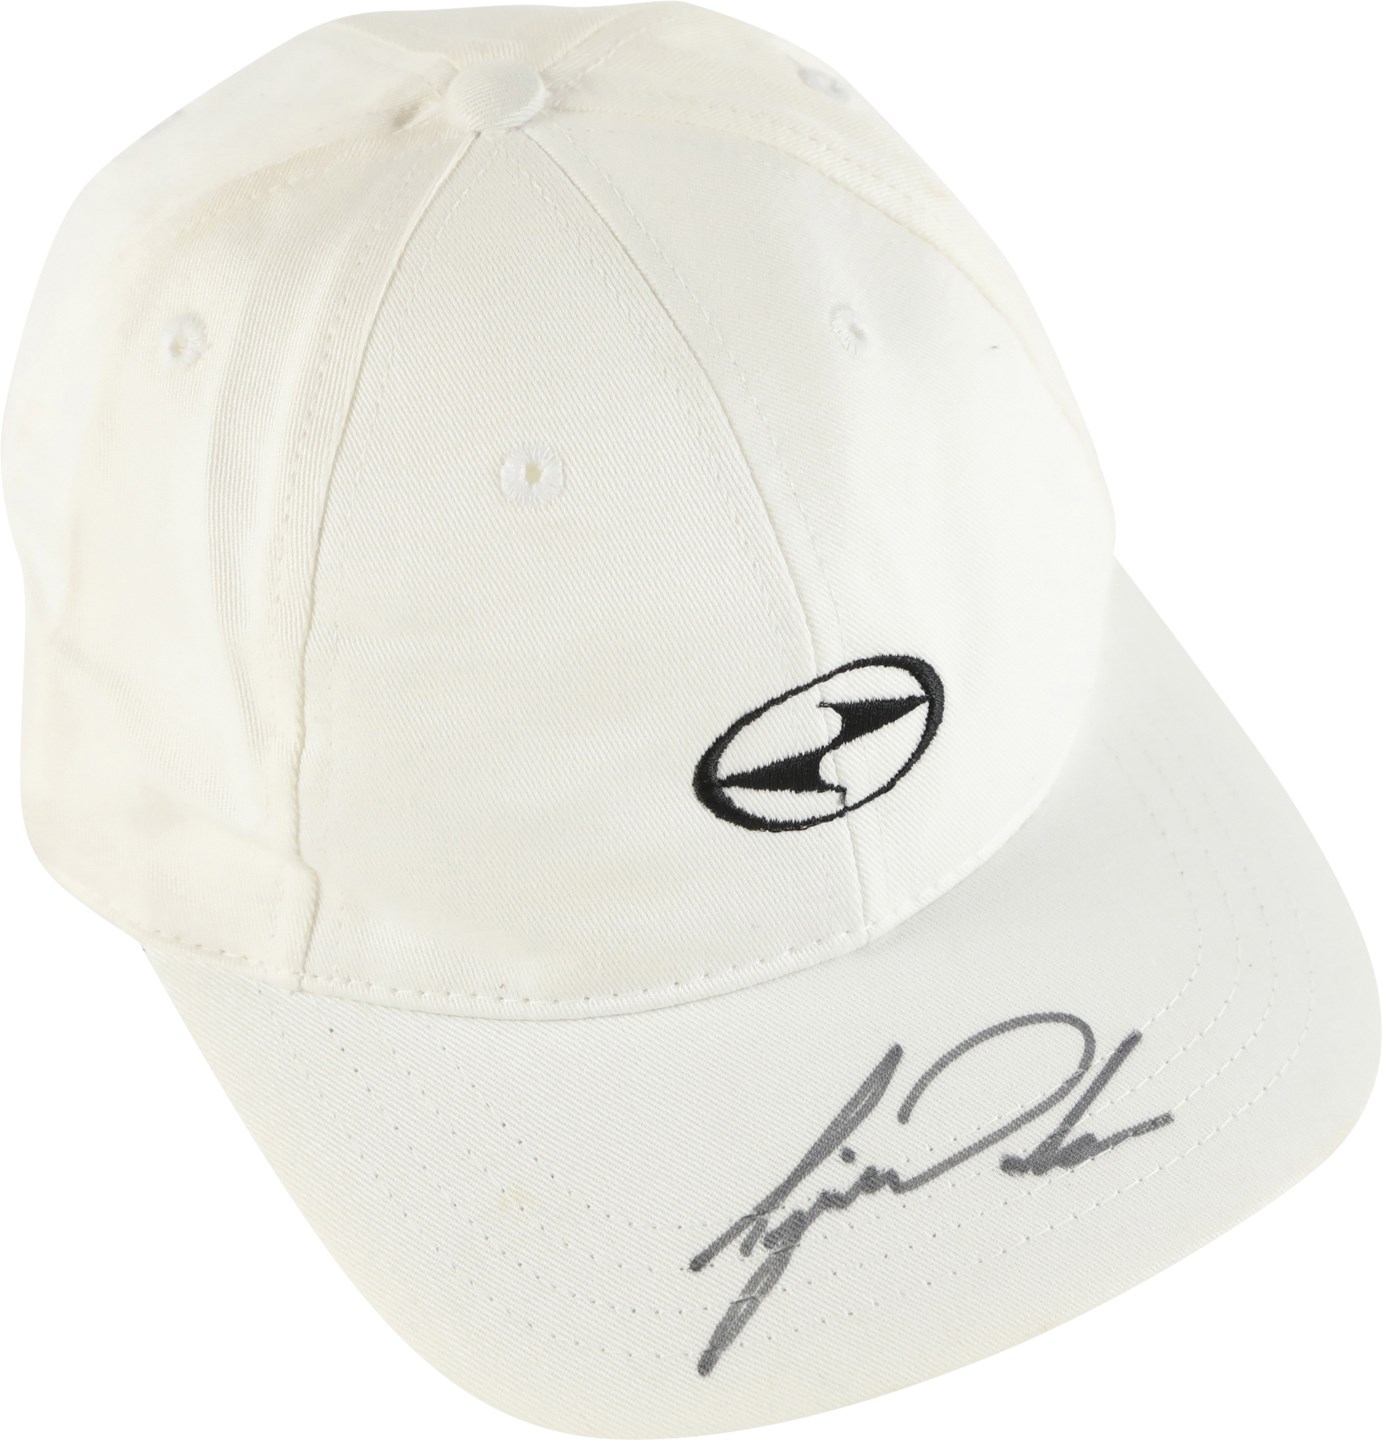 Olympics and All Sports - Tiger Woods Signed Nike Golf Hat (PSA & JSA)